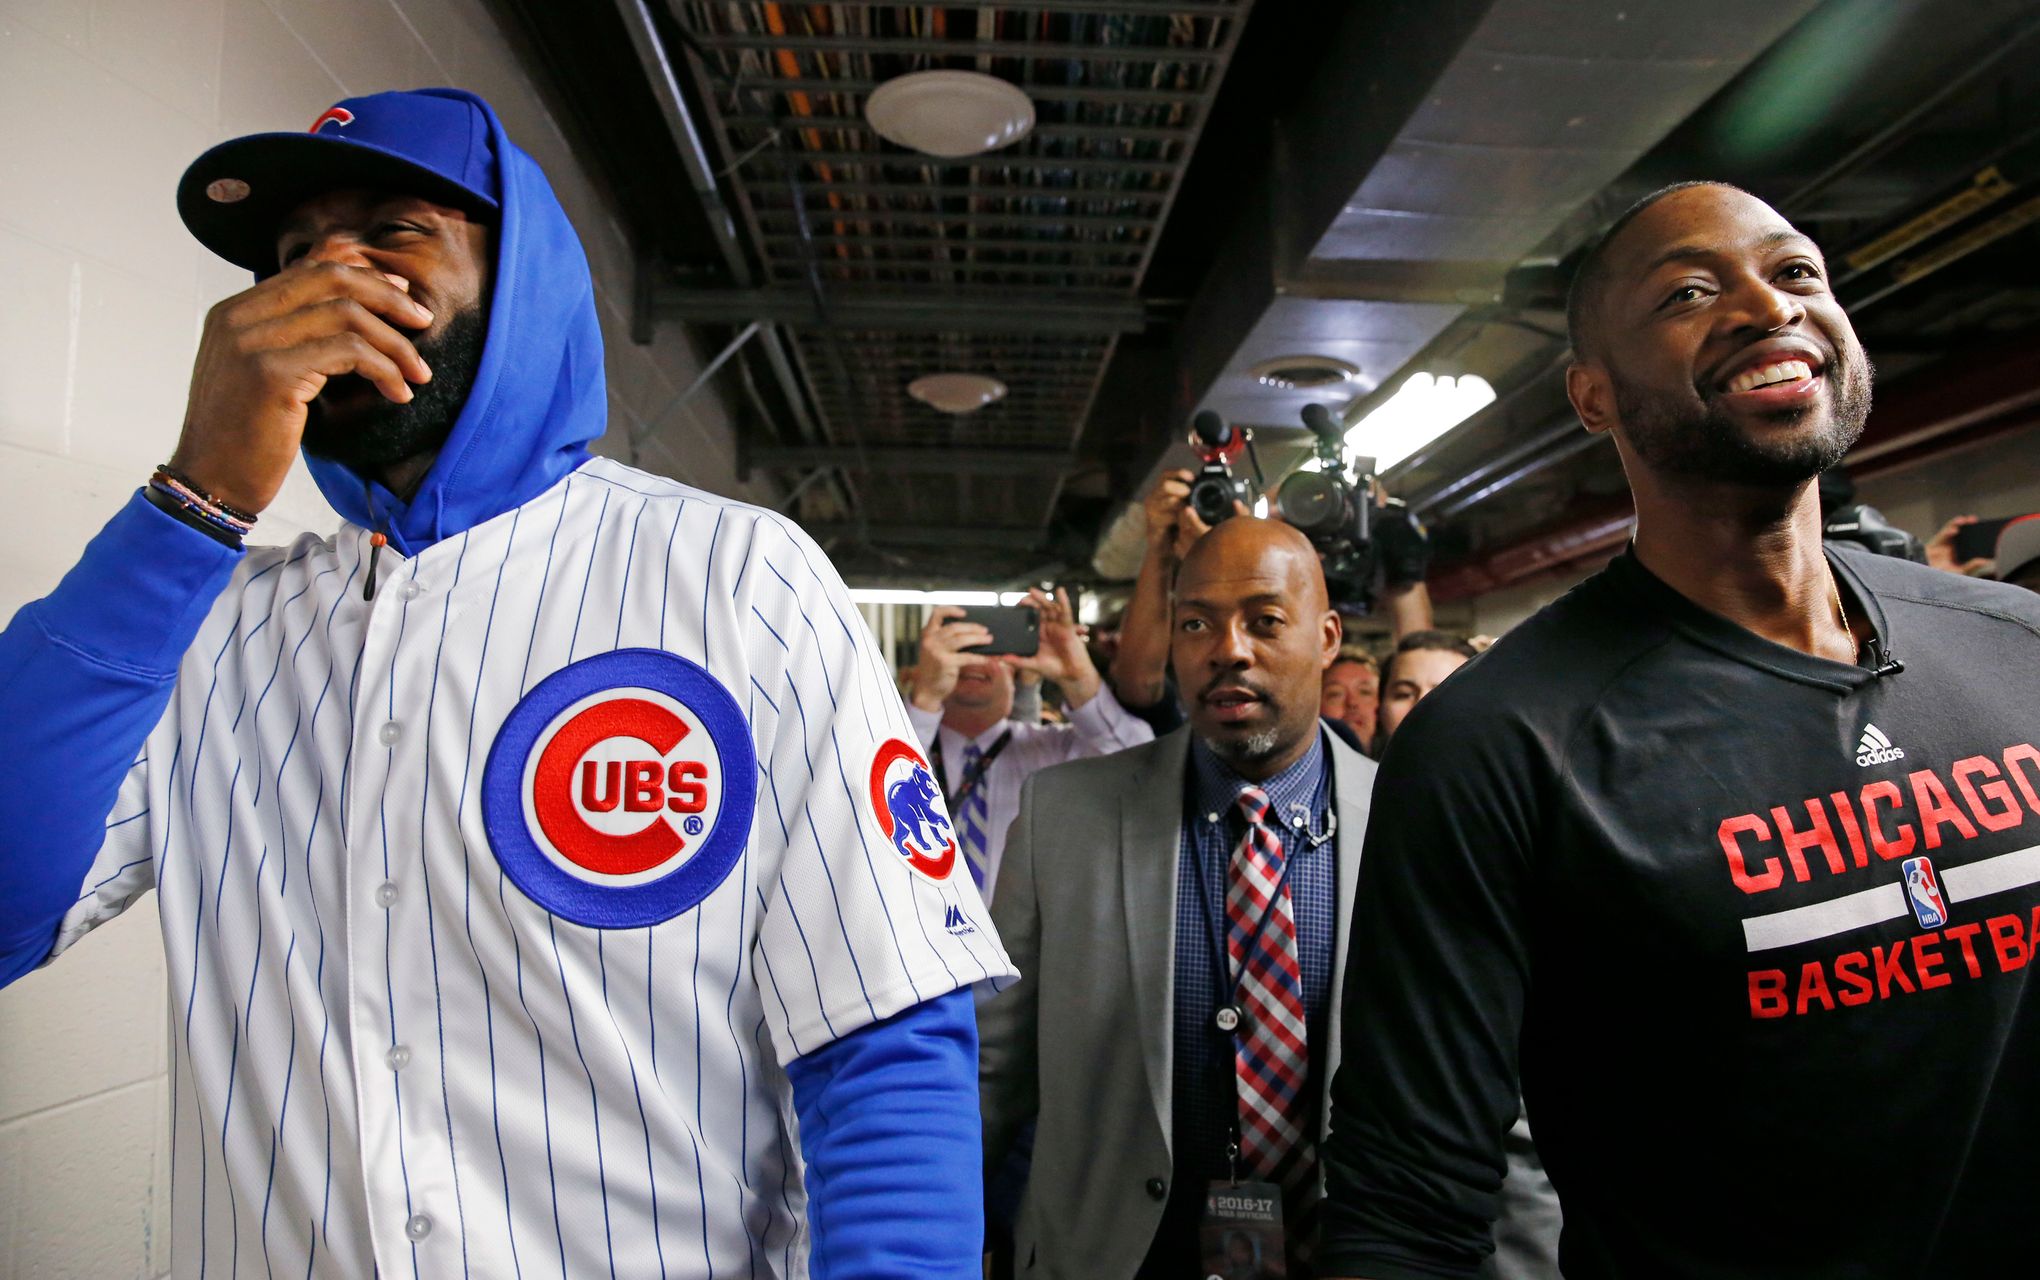 A bet is a bet - LeBron James wears full Chicago Cubs uniform to game - NZ  Herald